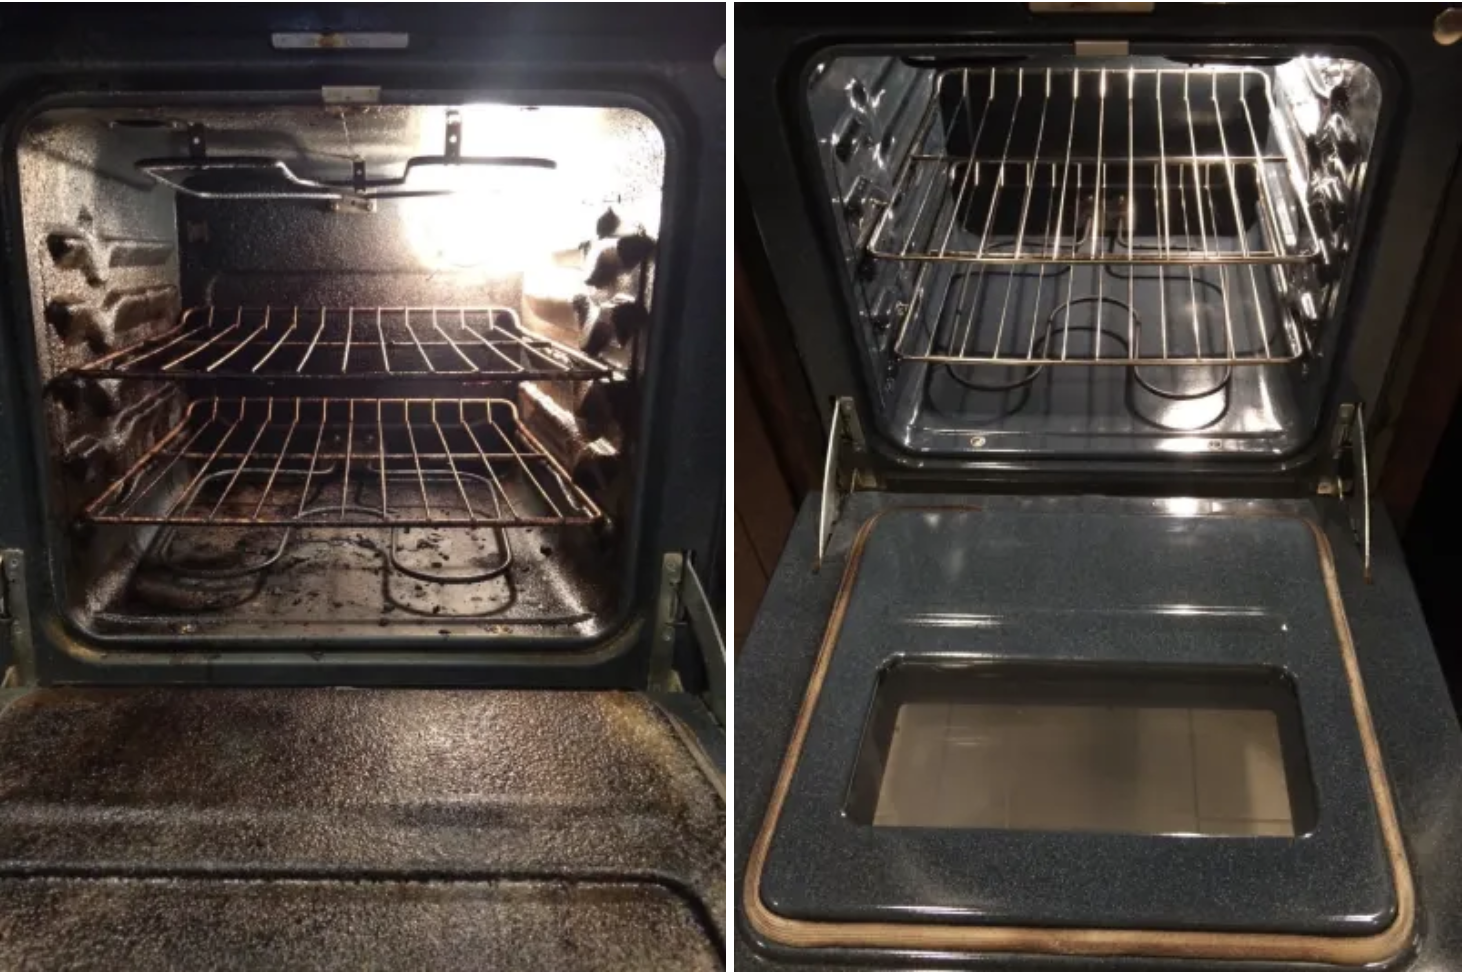 Left: A reviewer&#x27;s dirty, grease-baked-on oven / right: The same oven, shiny and clean after using the cleaner